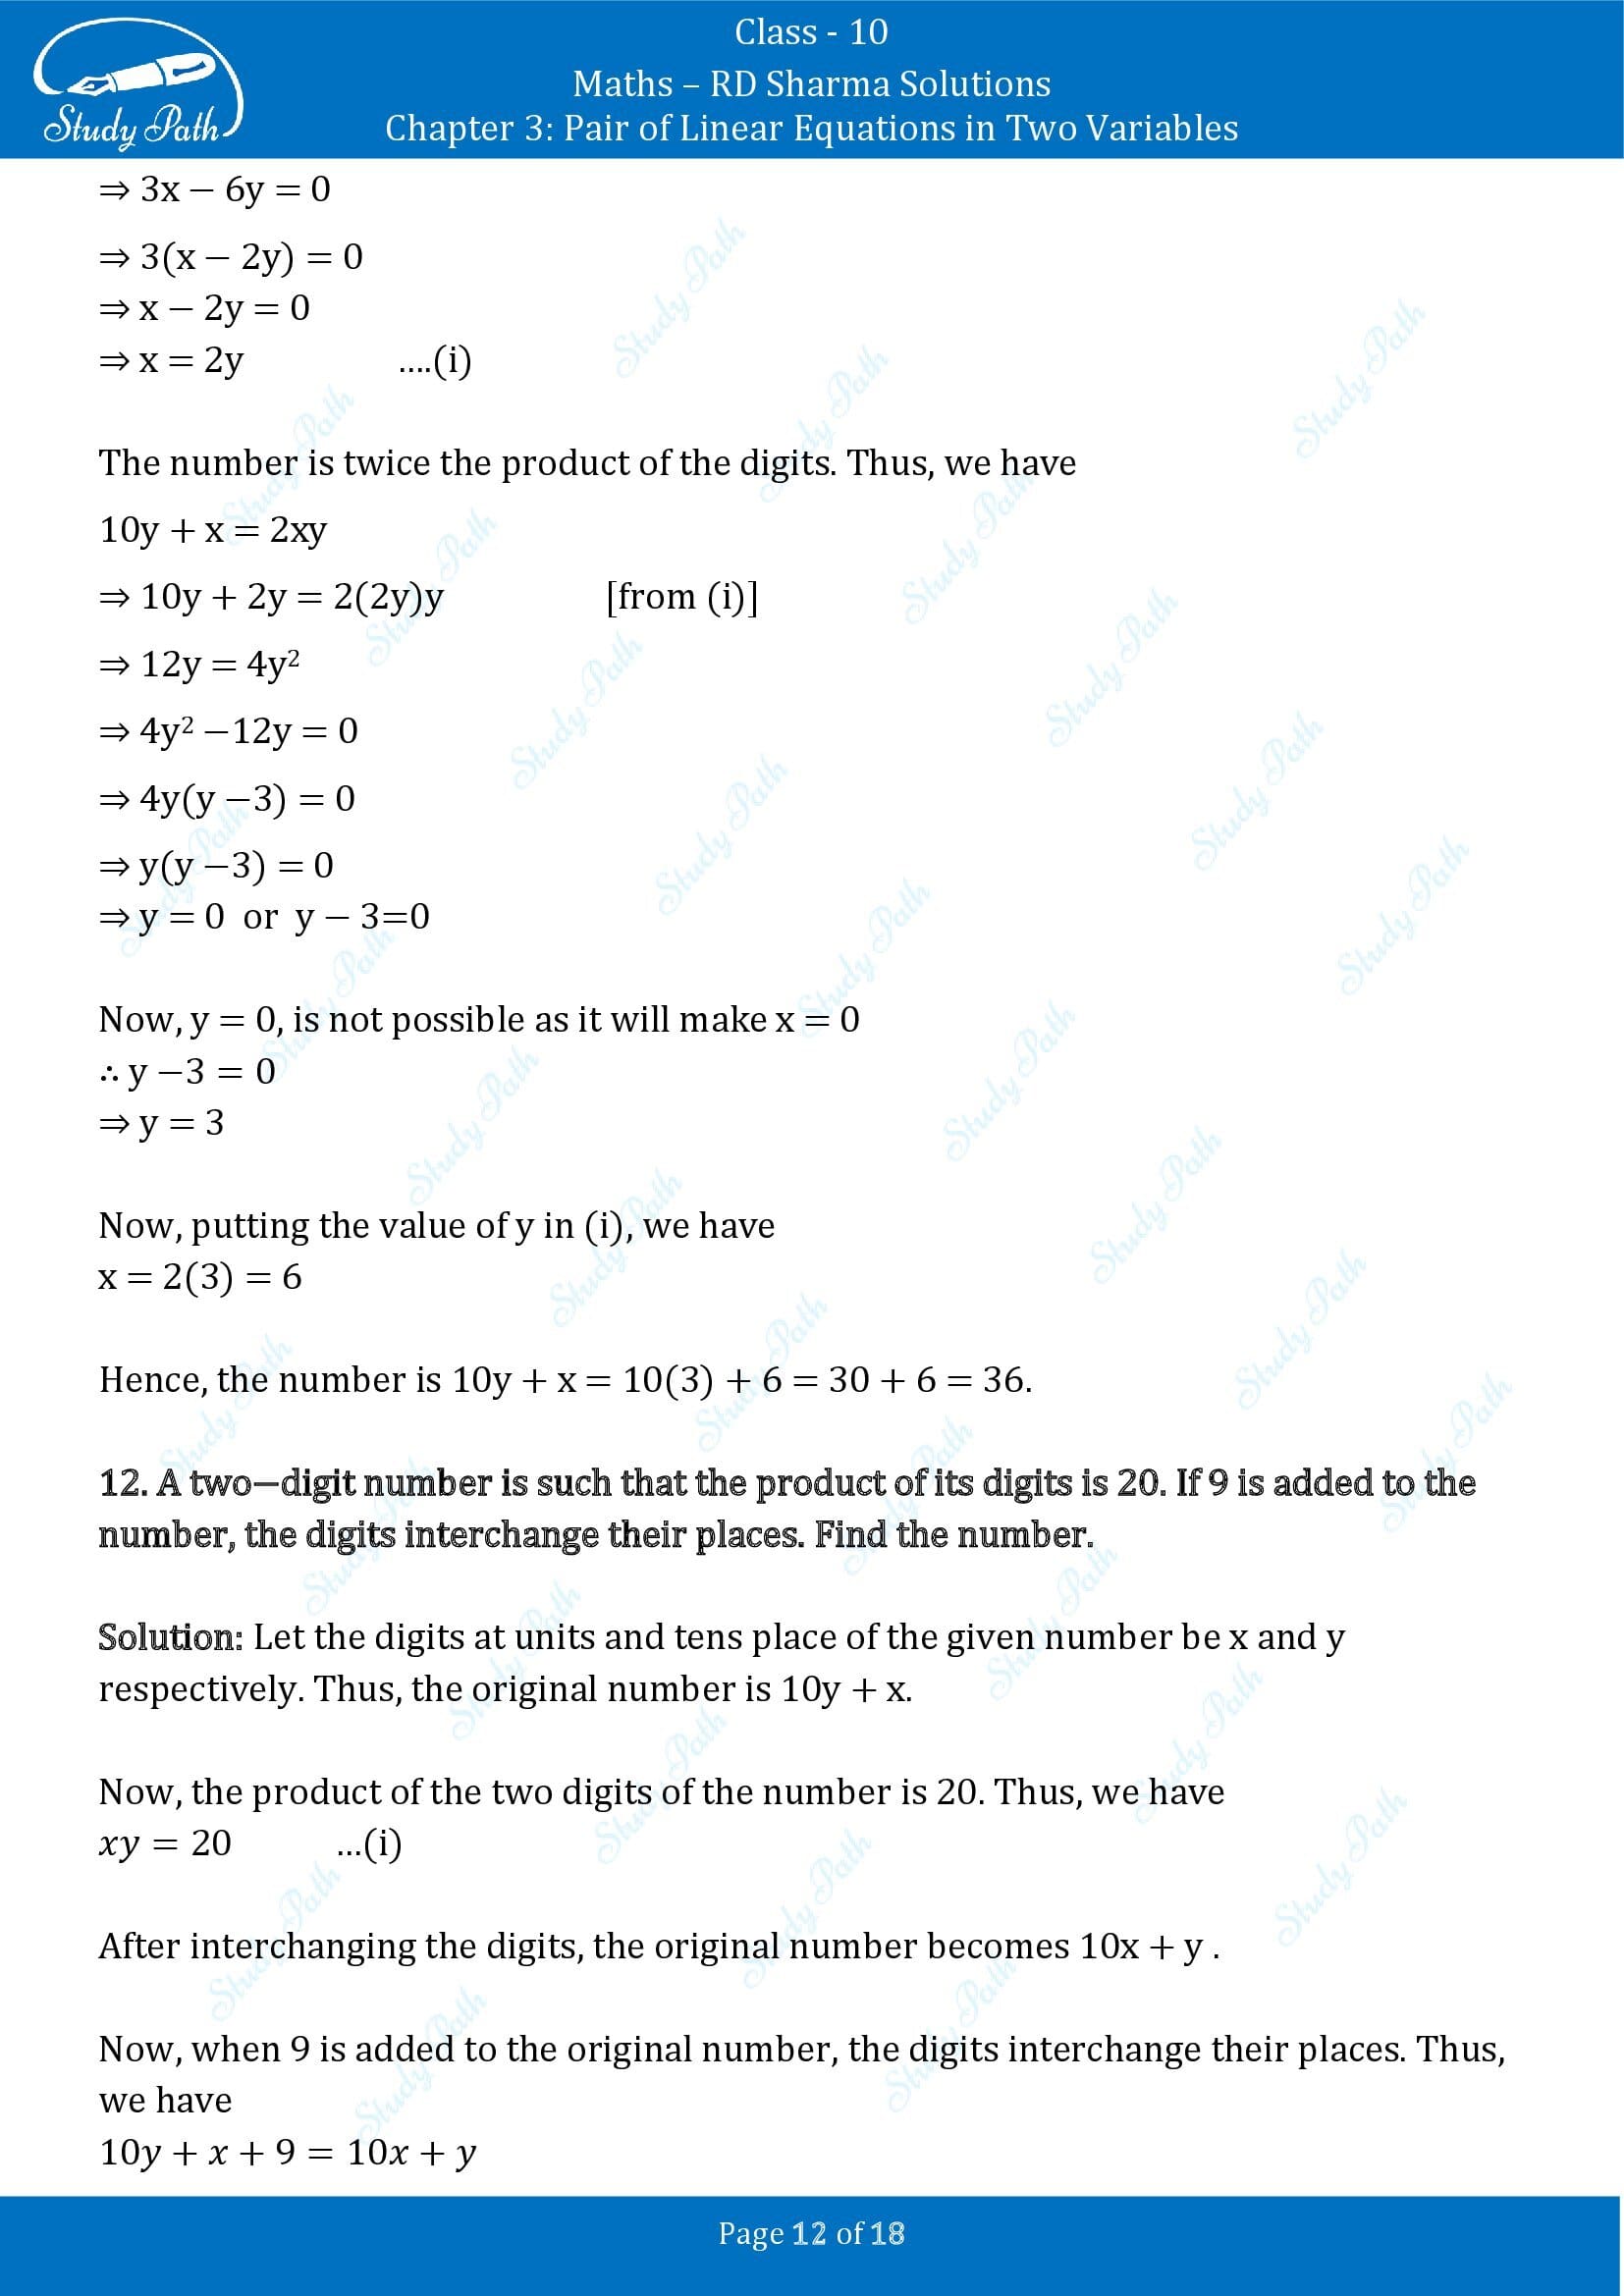 RD Sharma Solutions Class 10 Chapter 3 Pair of Linear Equations in Two Variables Exercise 3.7 00012